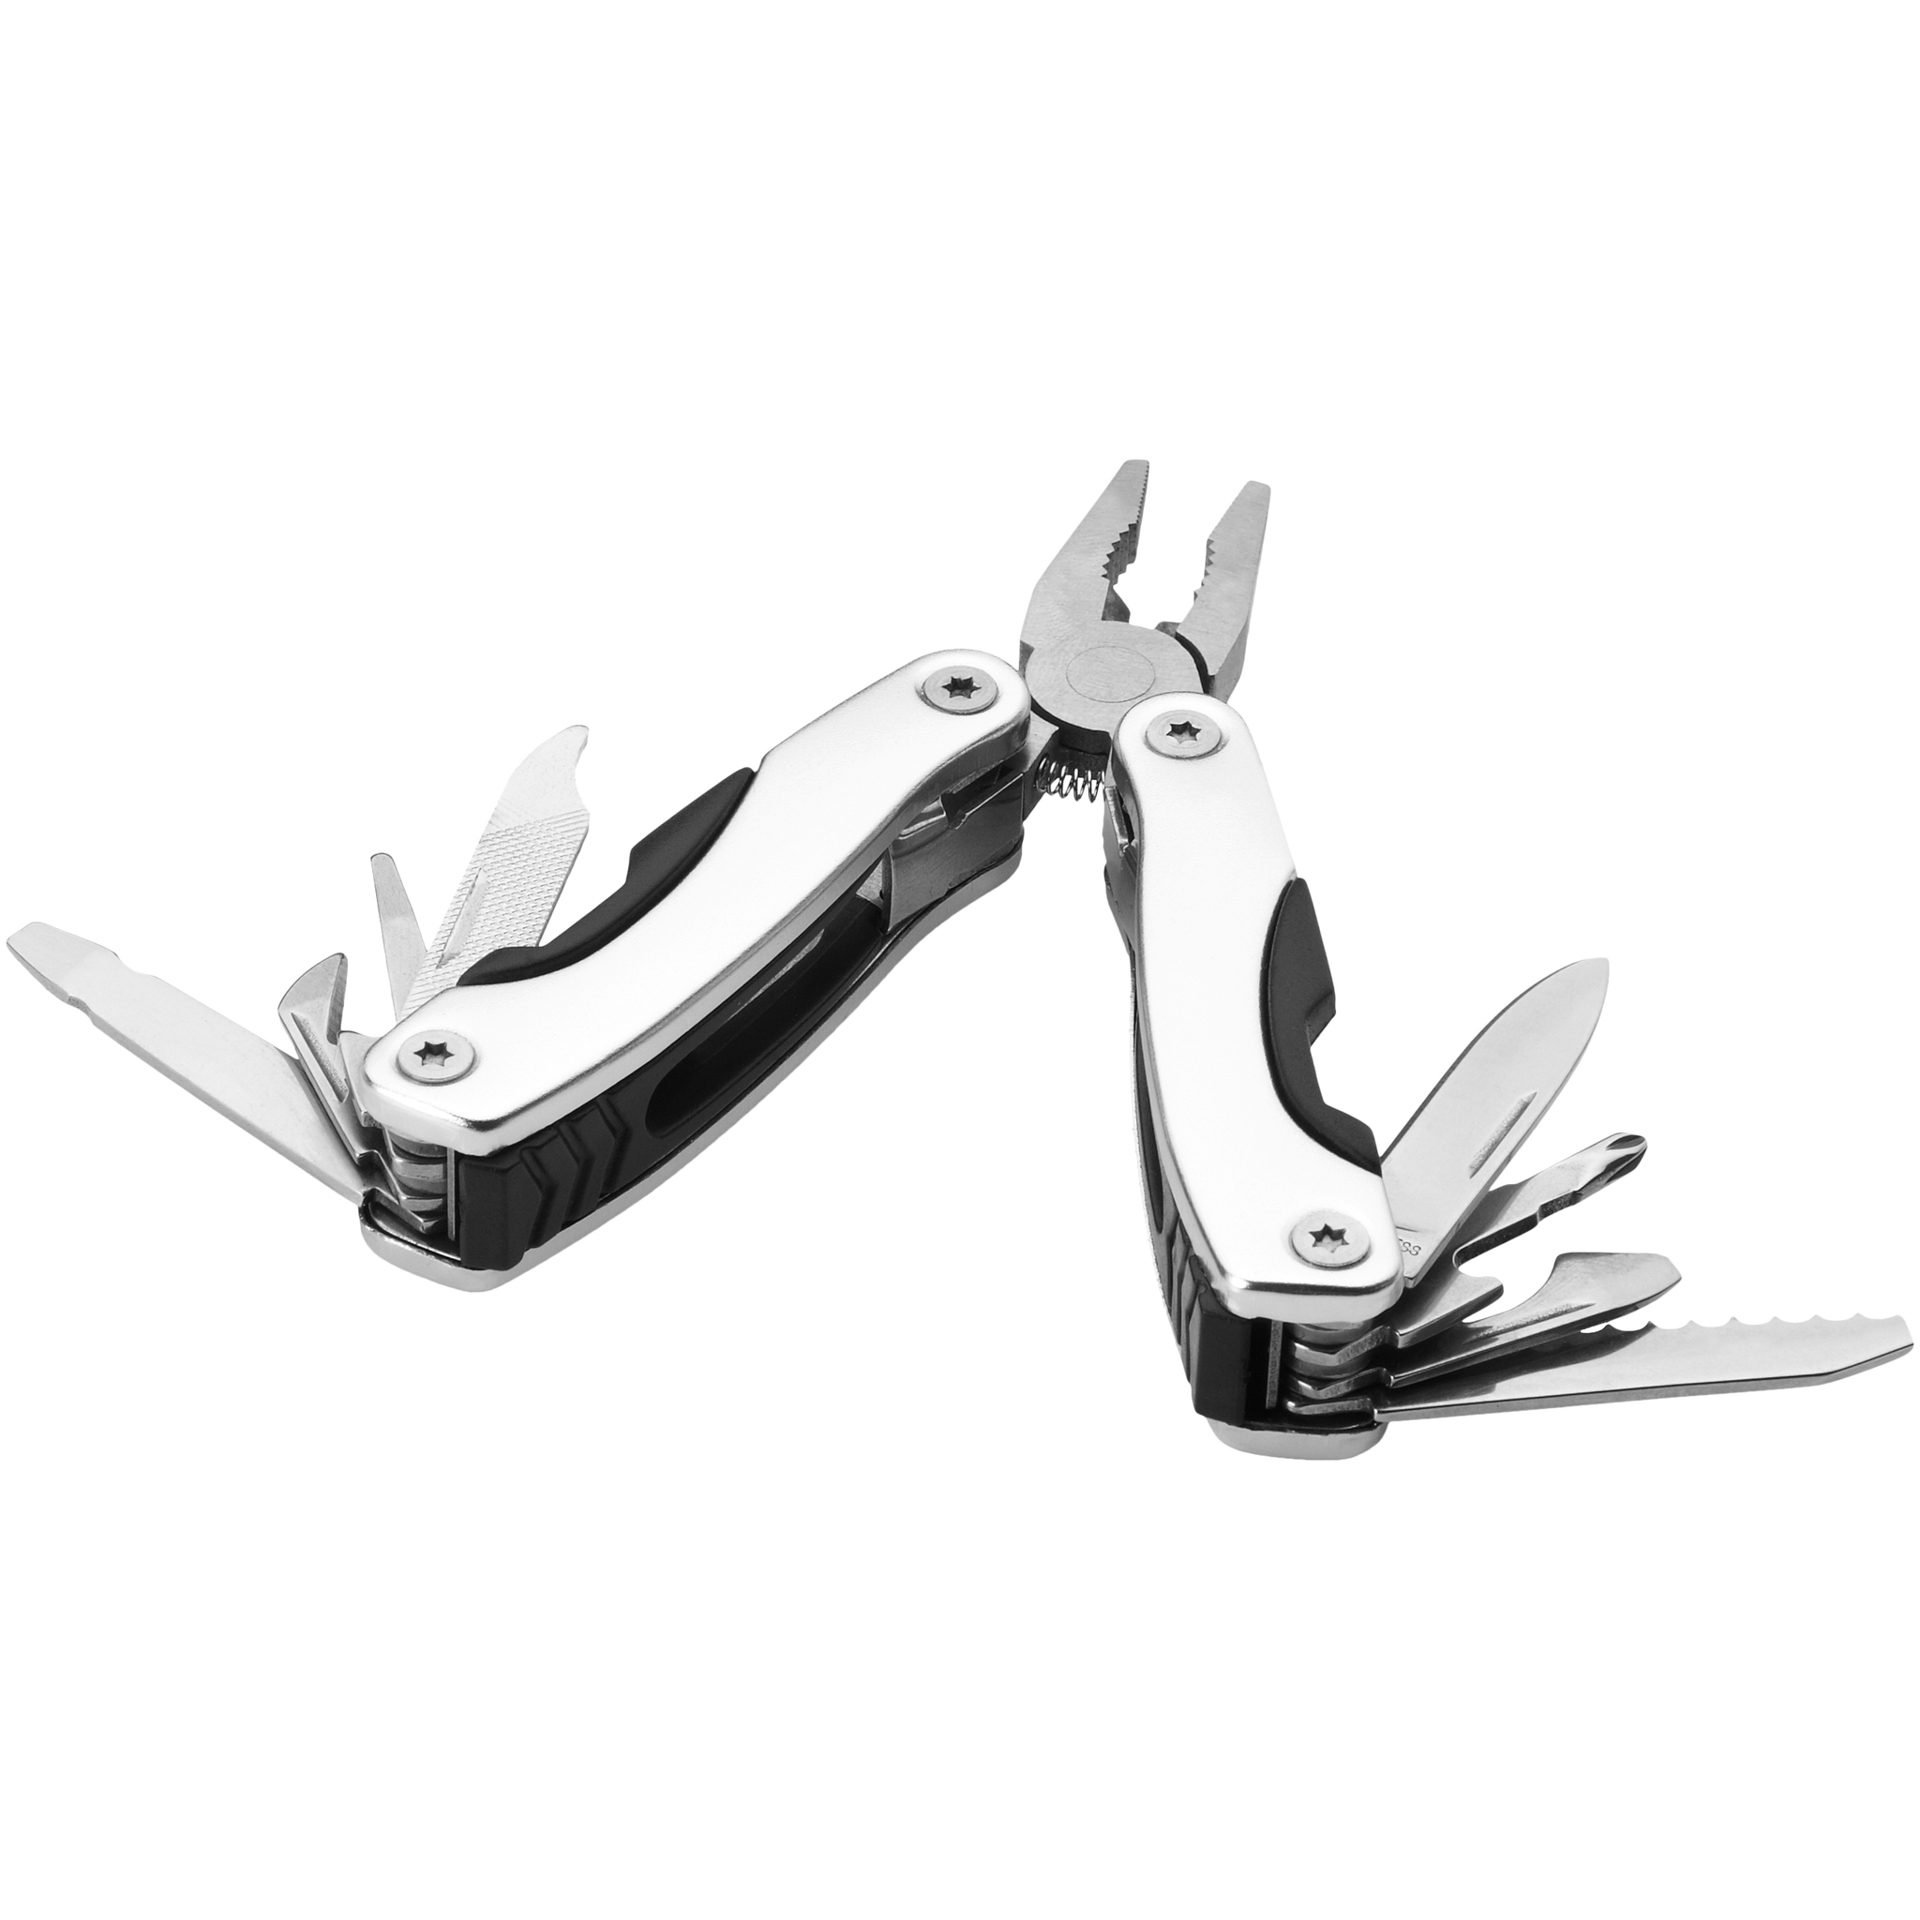 white and black mini multi tool in pouch